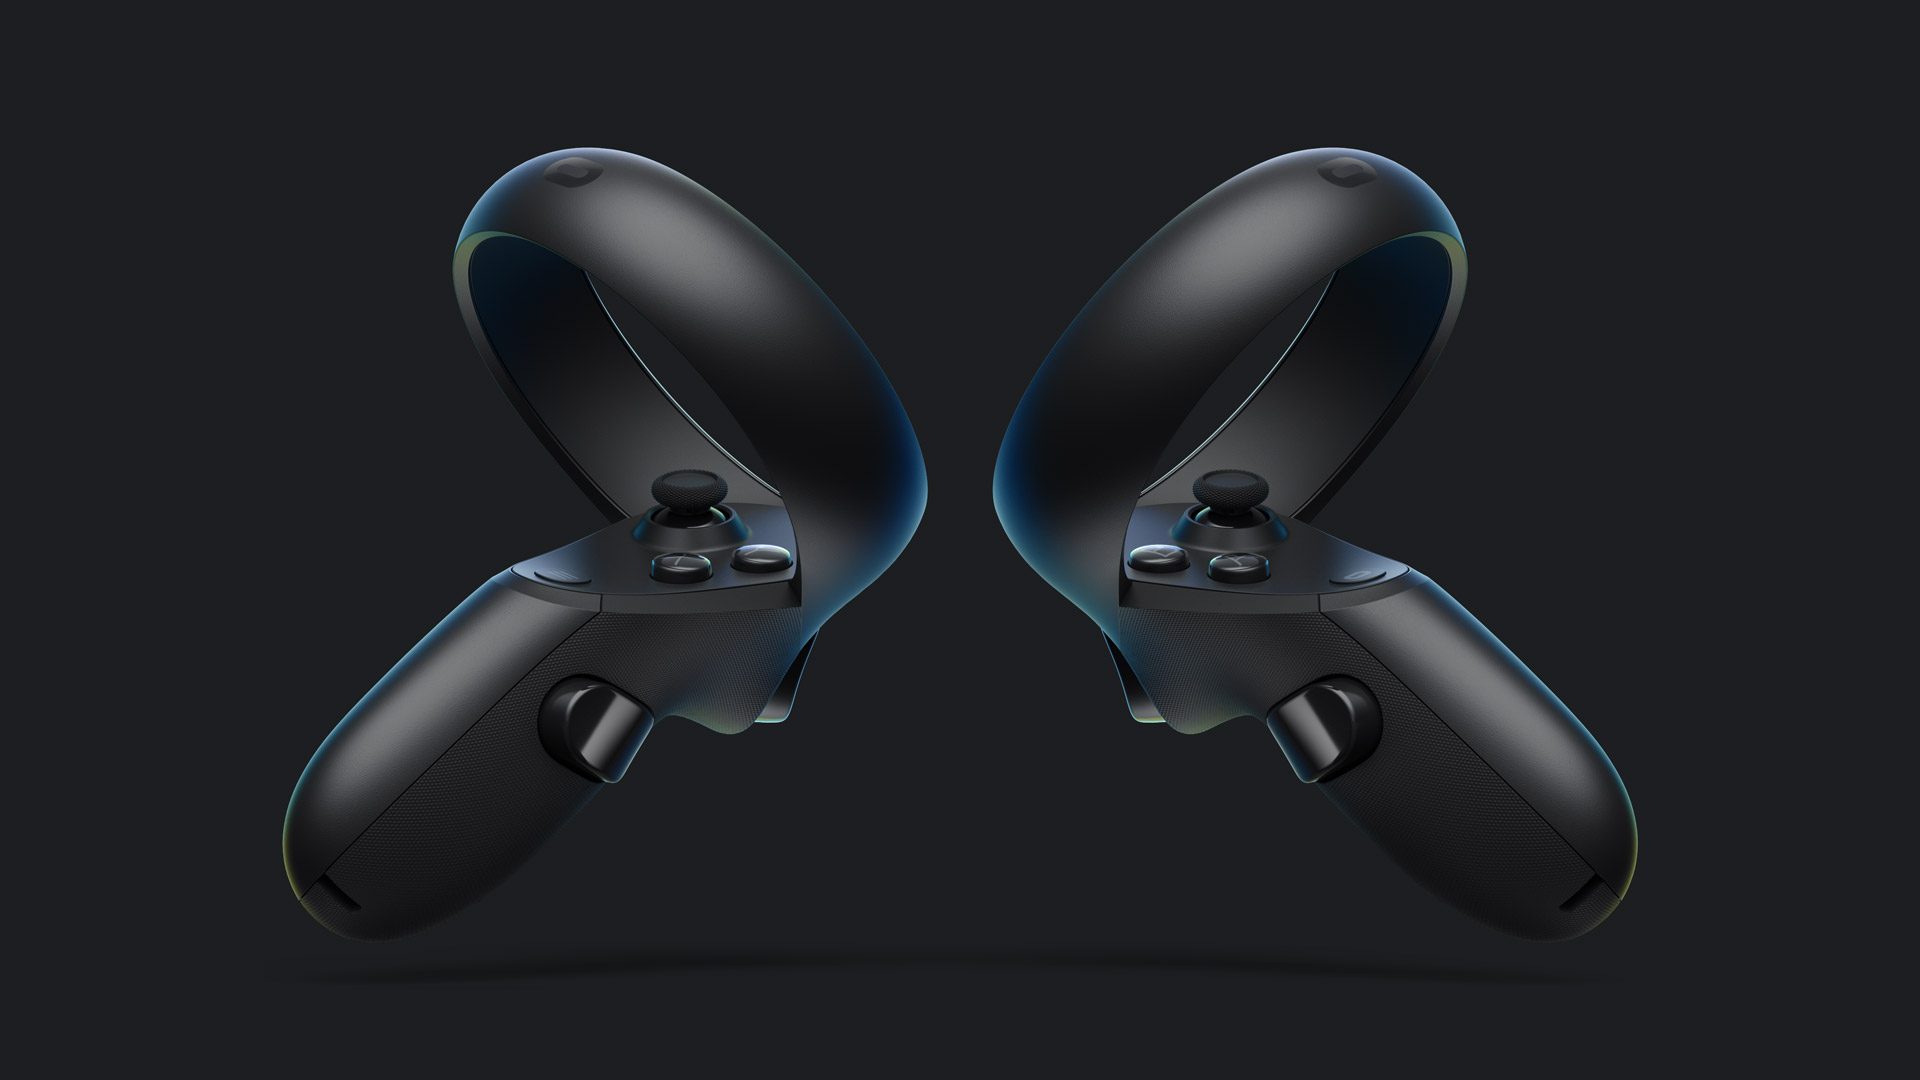 oculus rift s controllers stuck in place